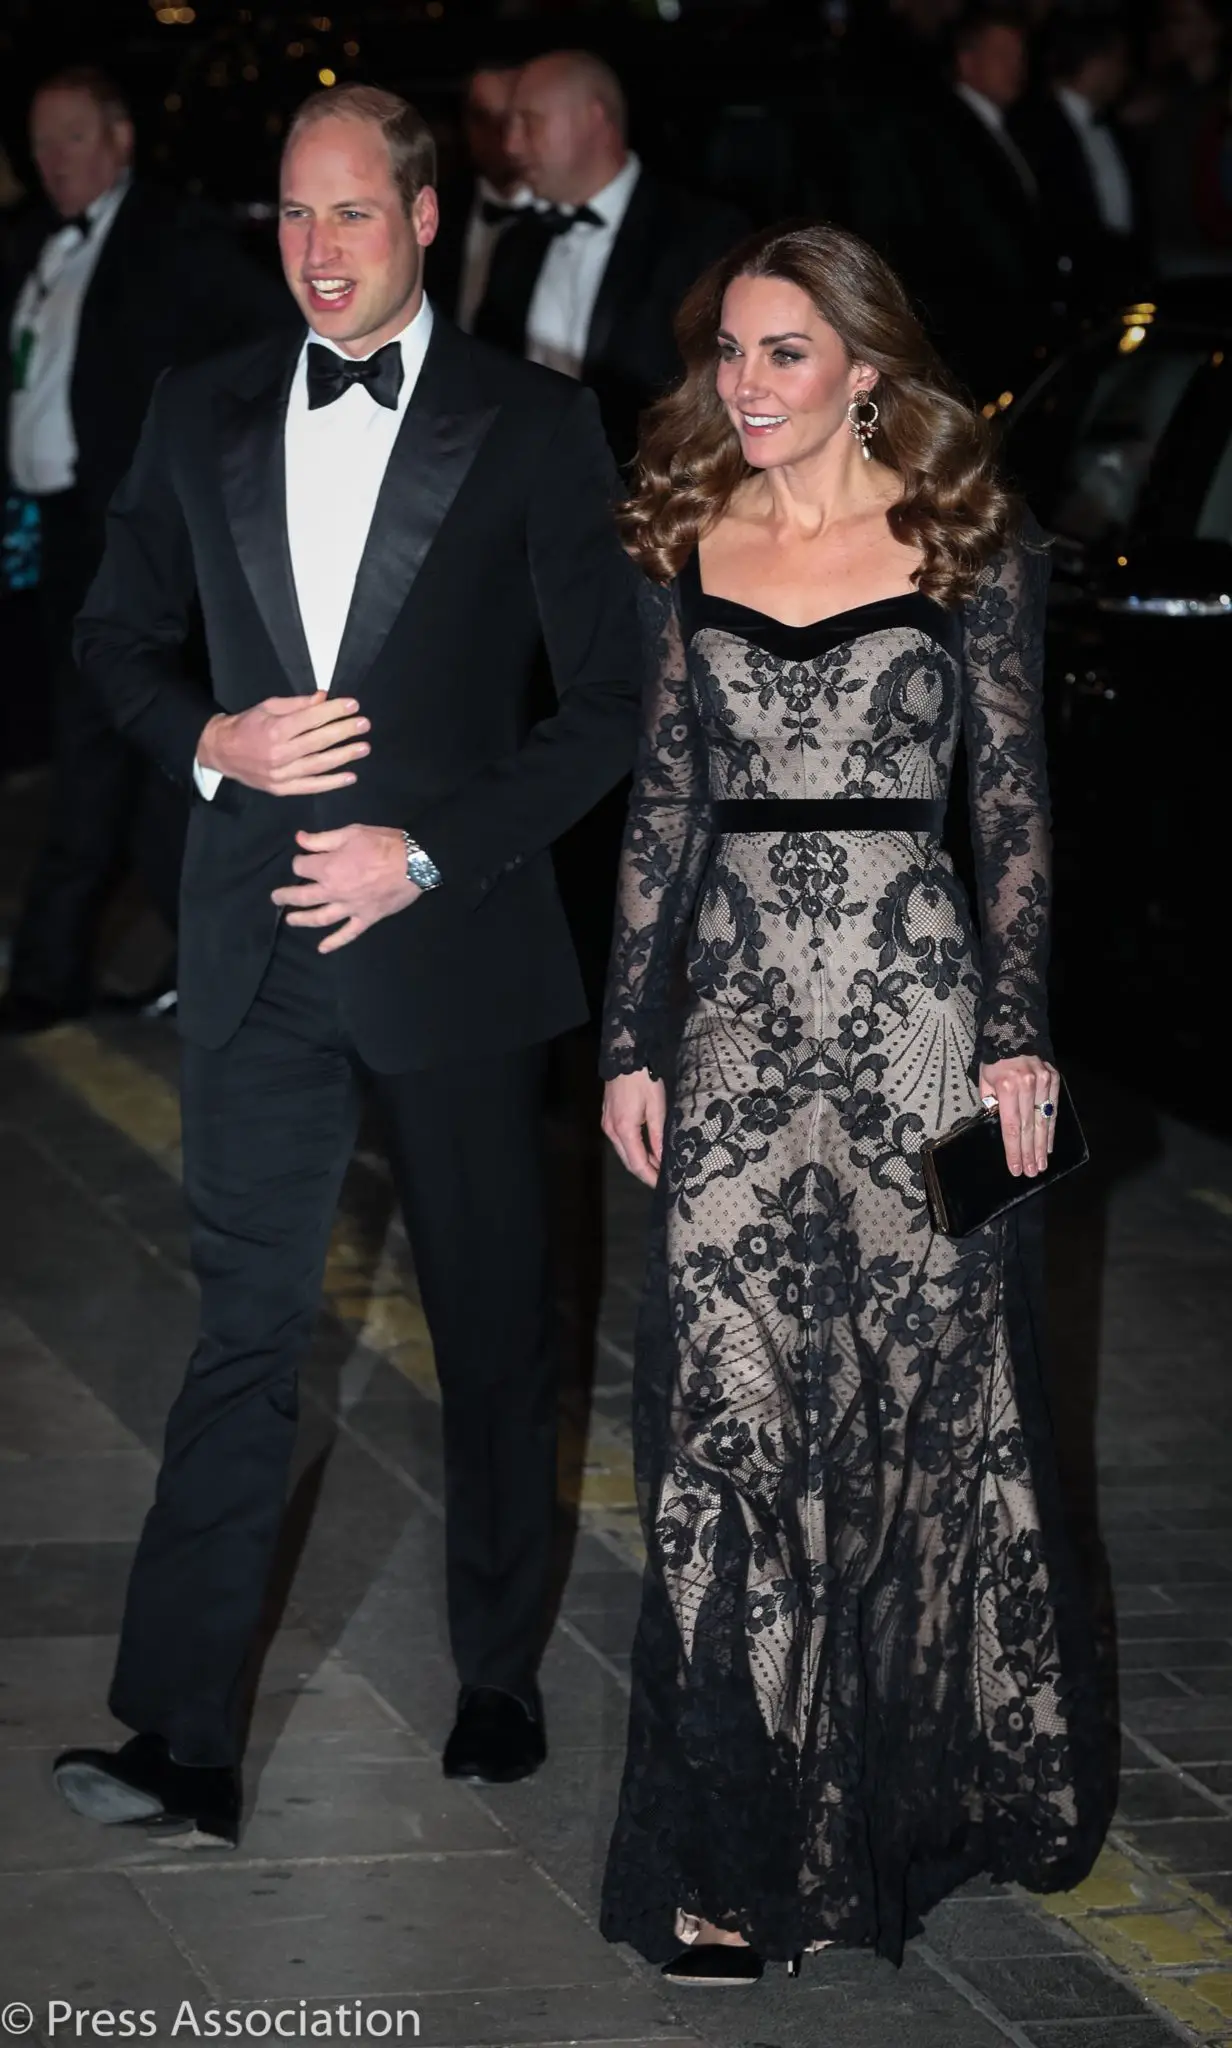 The Duchess of Cambridge attended royal Variety performance in november 2019